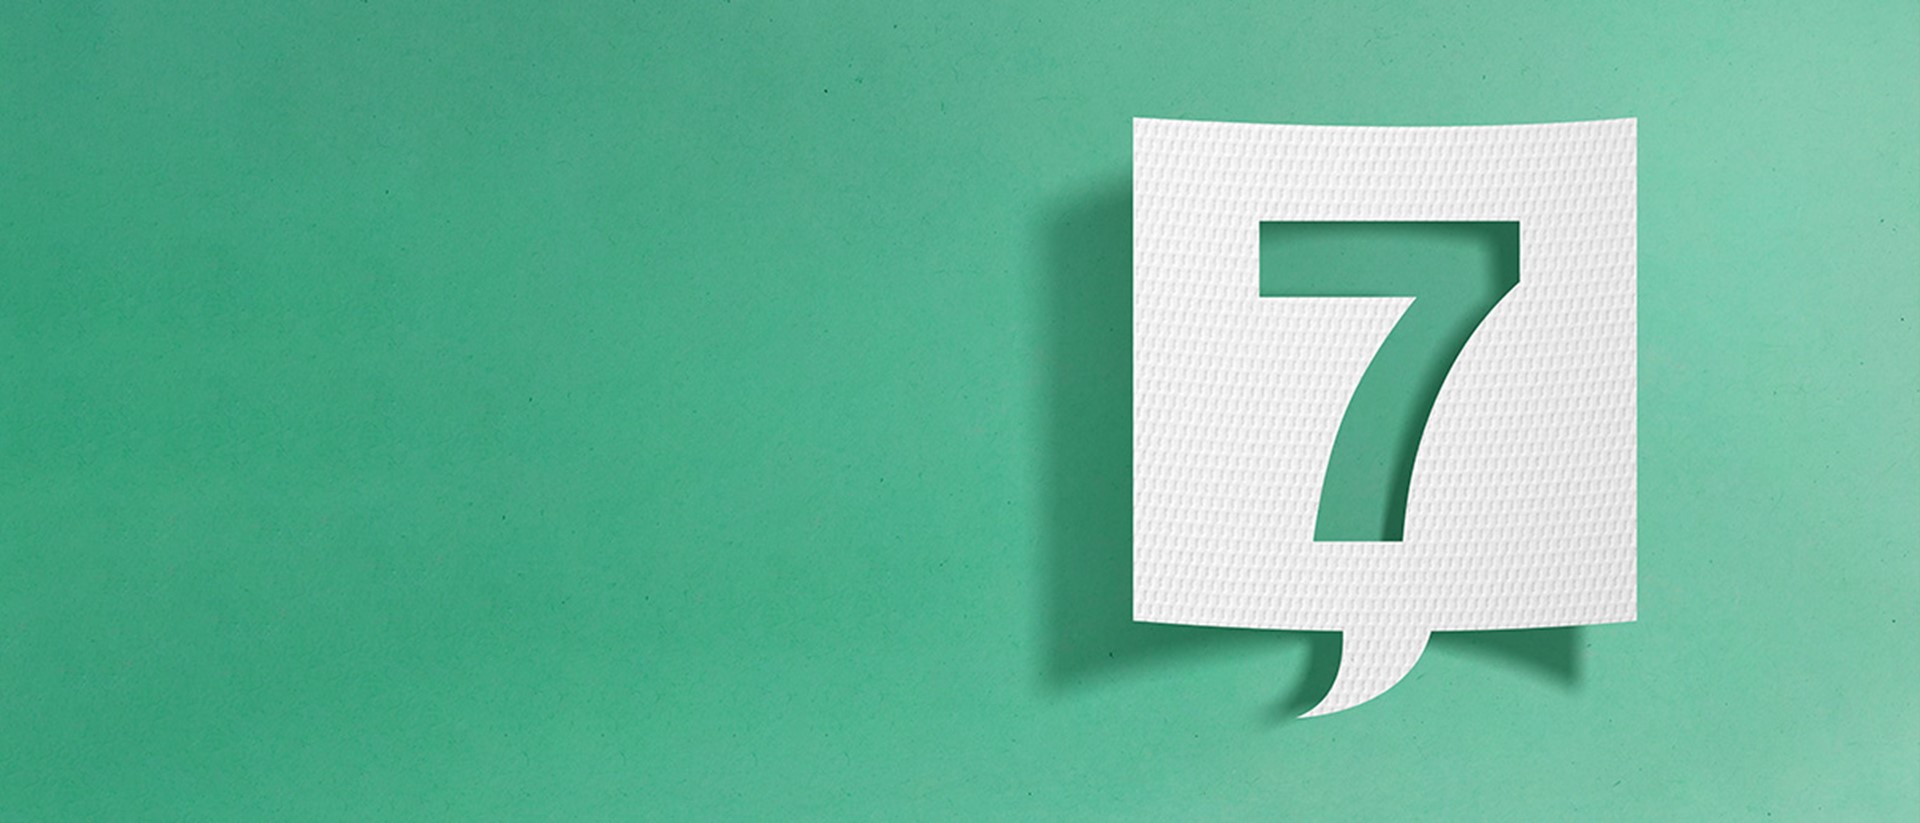 Image of the number 7 on a green background